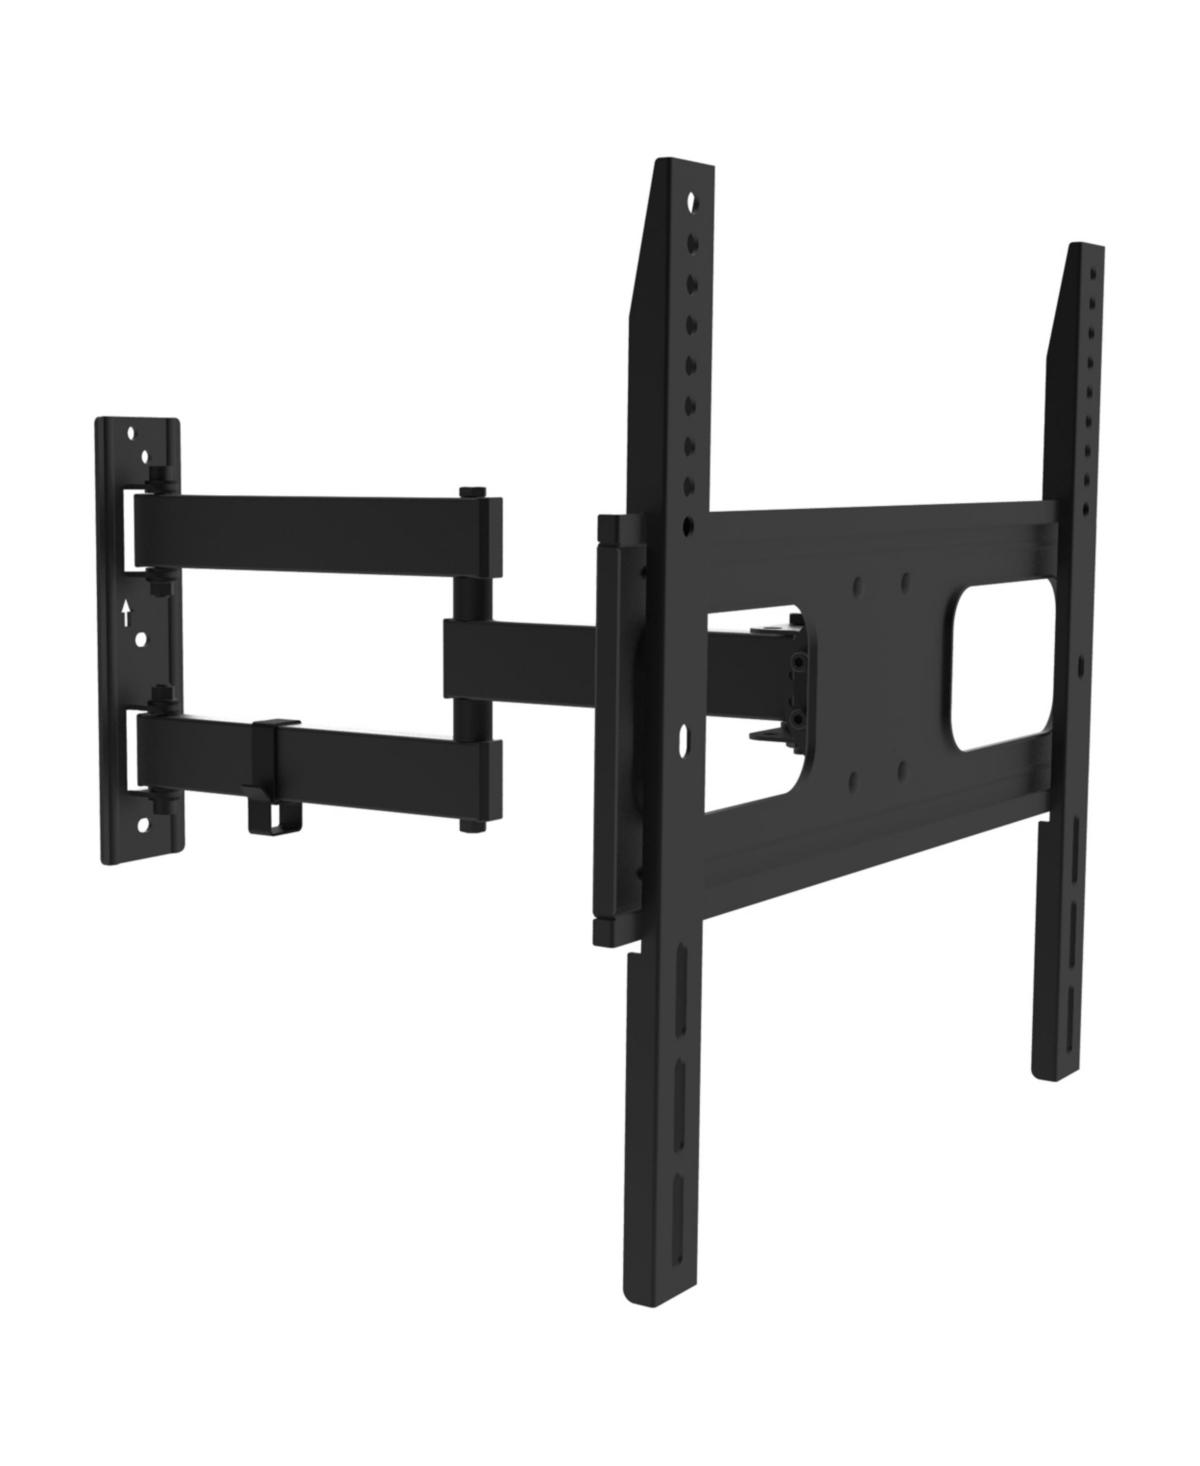 Full Motion Wall Mount for 32-75 Inch Displays - Black